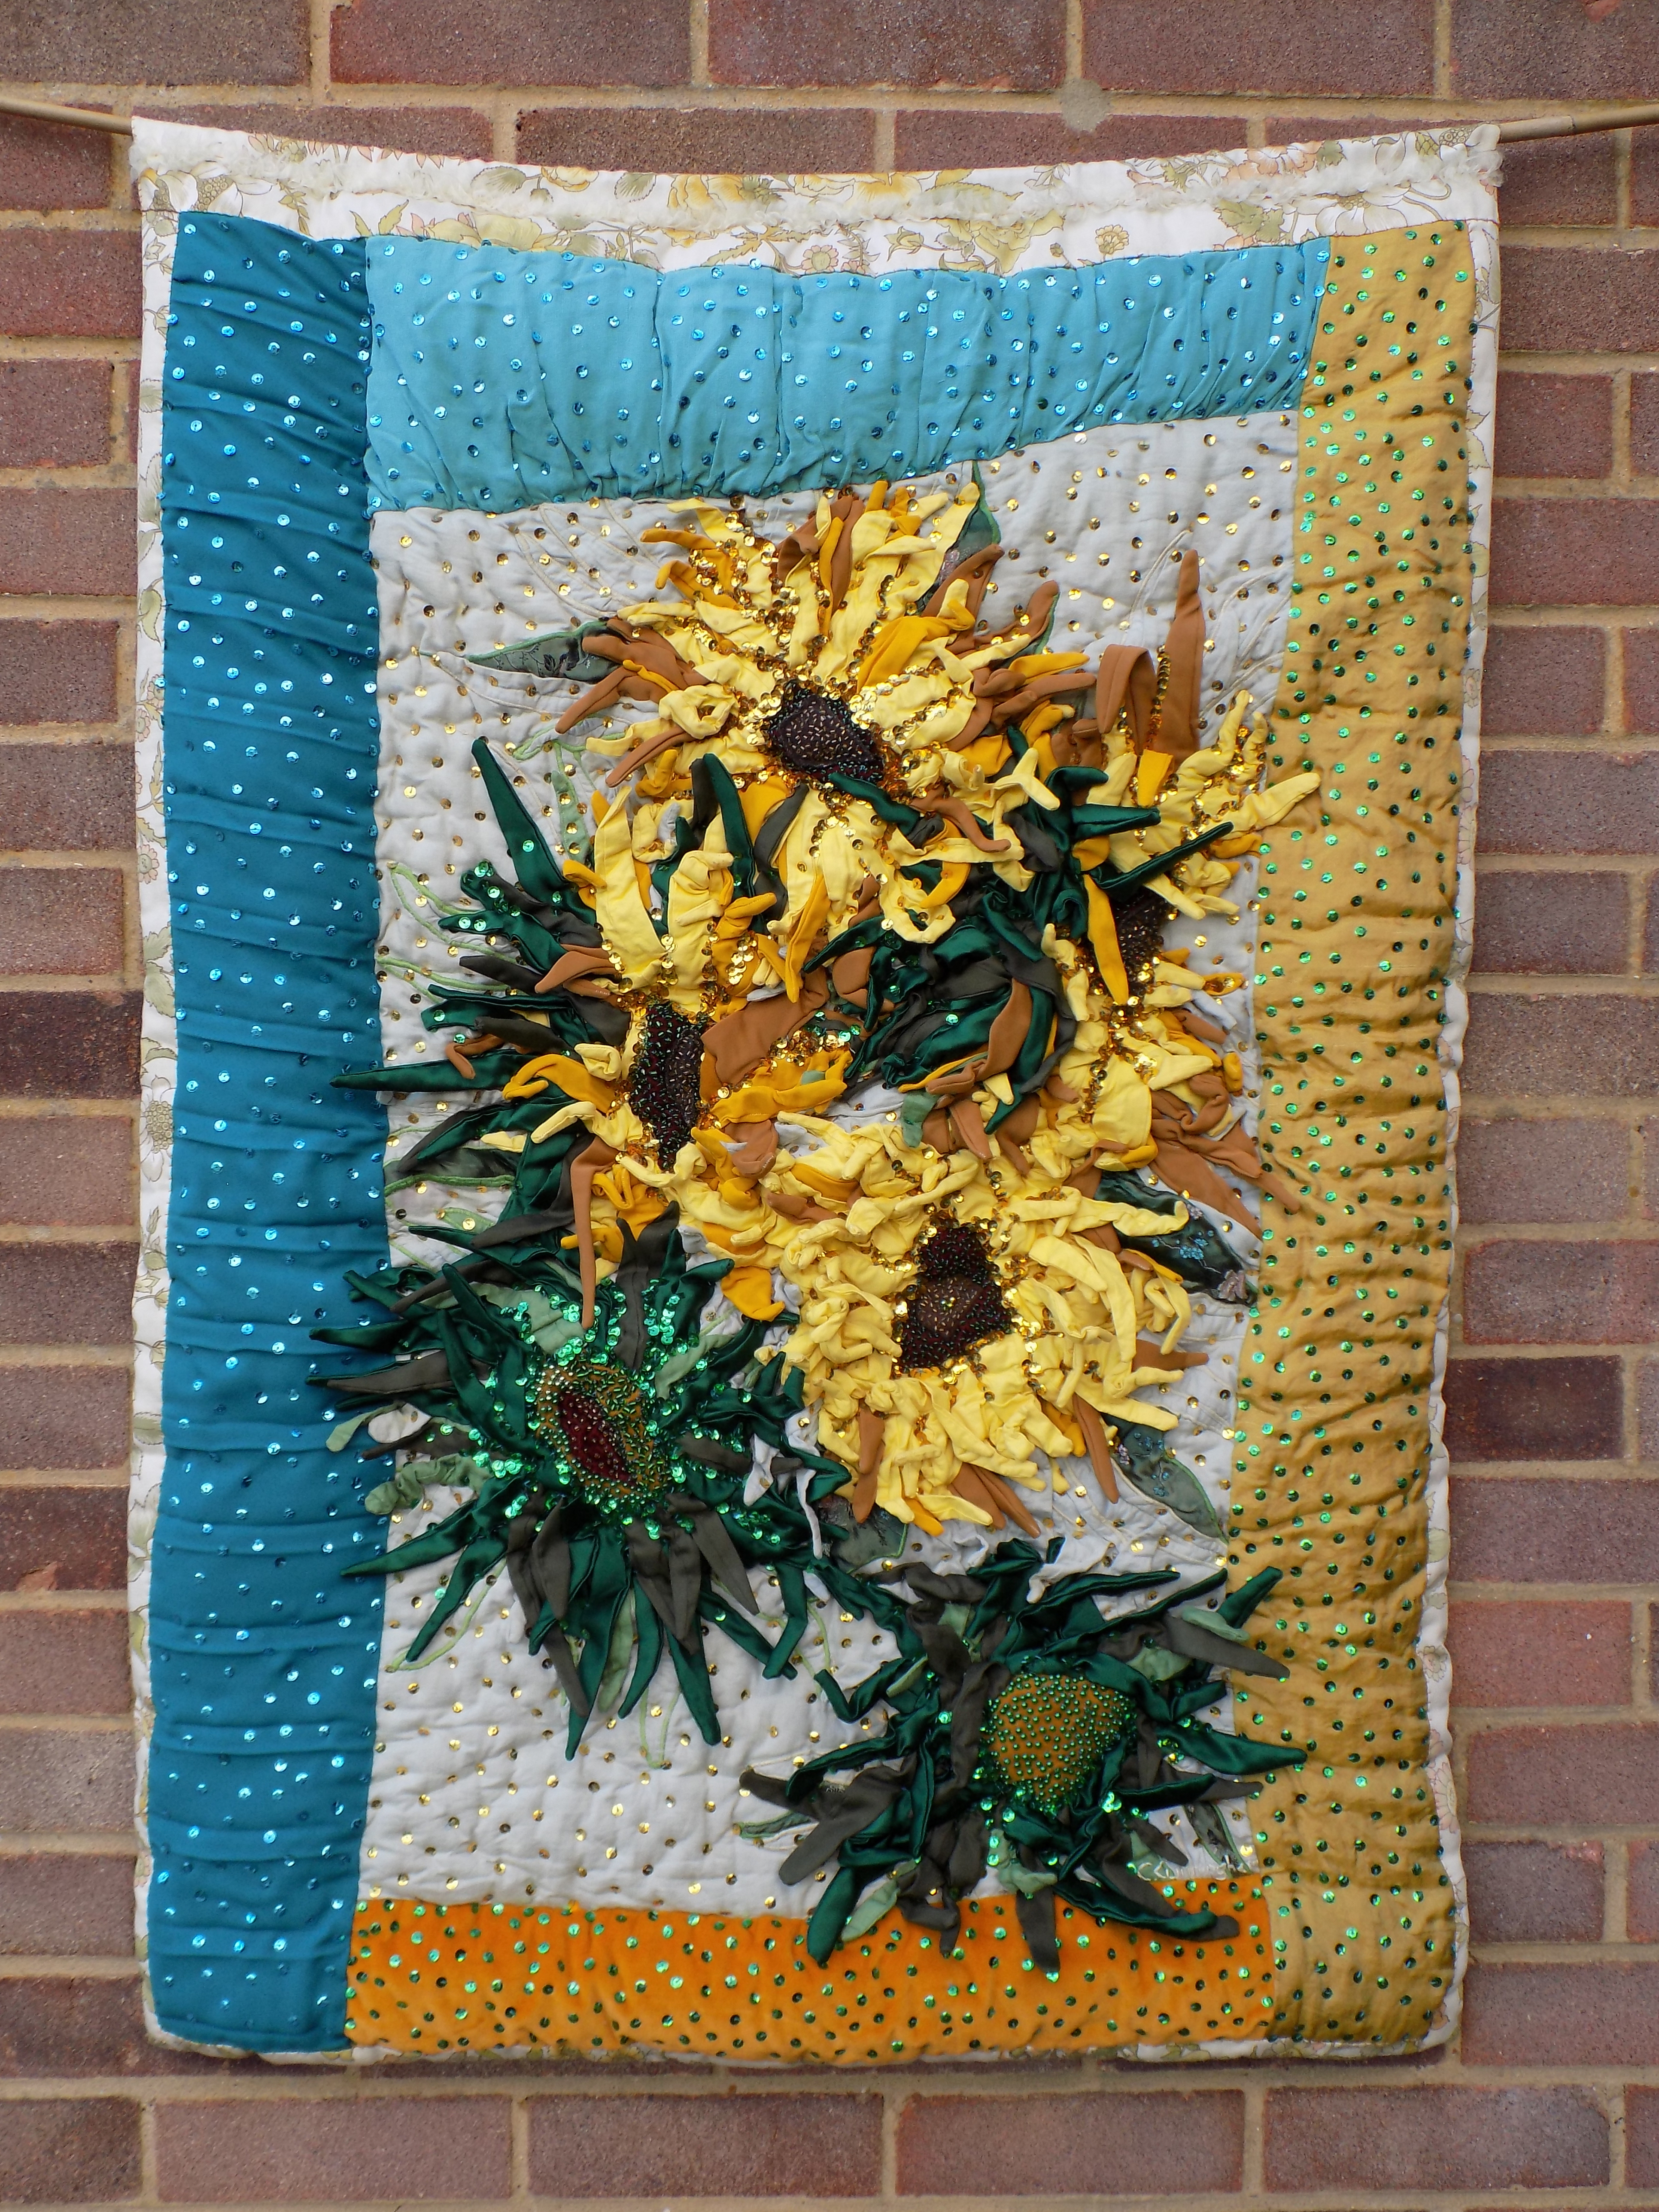 Christine Cunningham; Yellow Sunflowers, 2017, Original Textile, 33 x 47 inches. Artwork description: 241 Abstract flower design using 3D structure to create padded flower heads with individual tubular petals and leaves, with pipe cleaners giving a structured direction inside.  Embellished with beads and light reflective sequins.  Strong colour palette of yellow, gold, green and blue.  From the Abstract Flower Design 3D ...